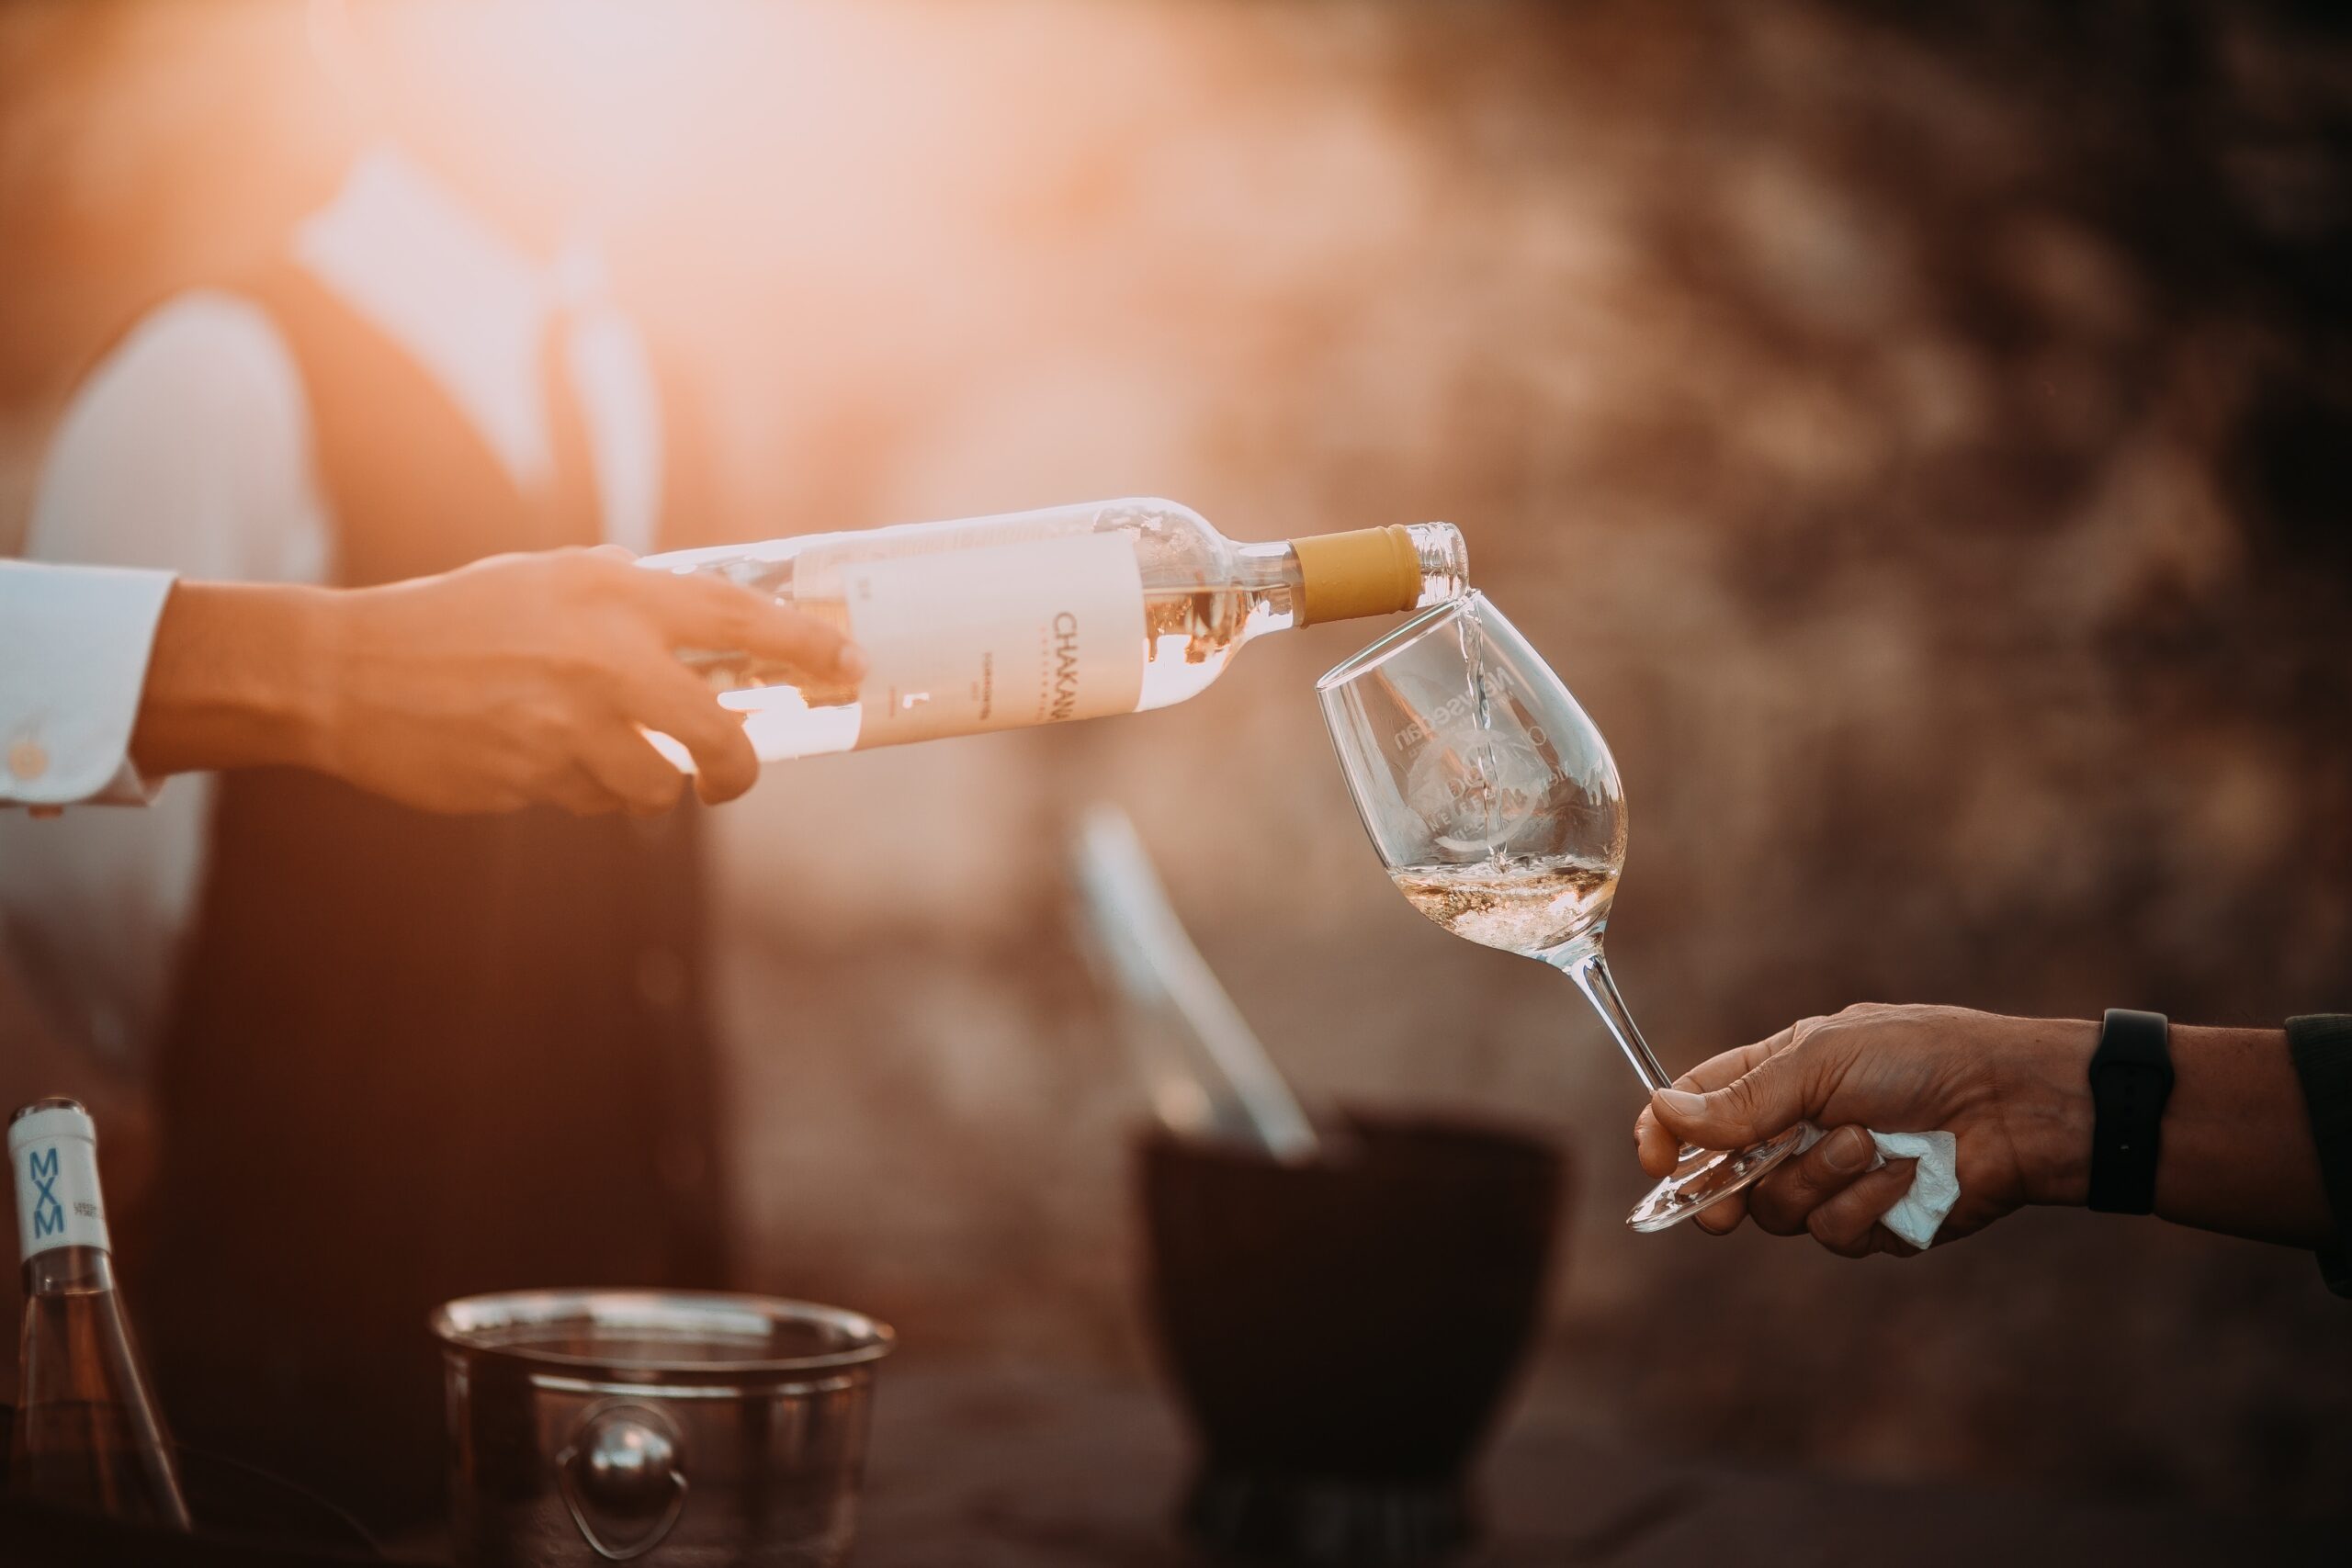 Malvasia is the vine of Mediterranean sea, a story of men, territories, methods, and traditions of the different areas. The image represents a sommelier who pours white wine ino the glass.